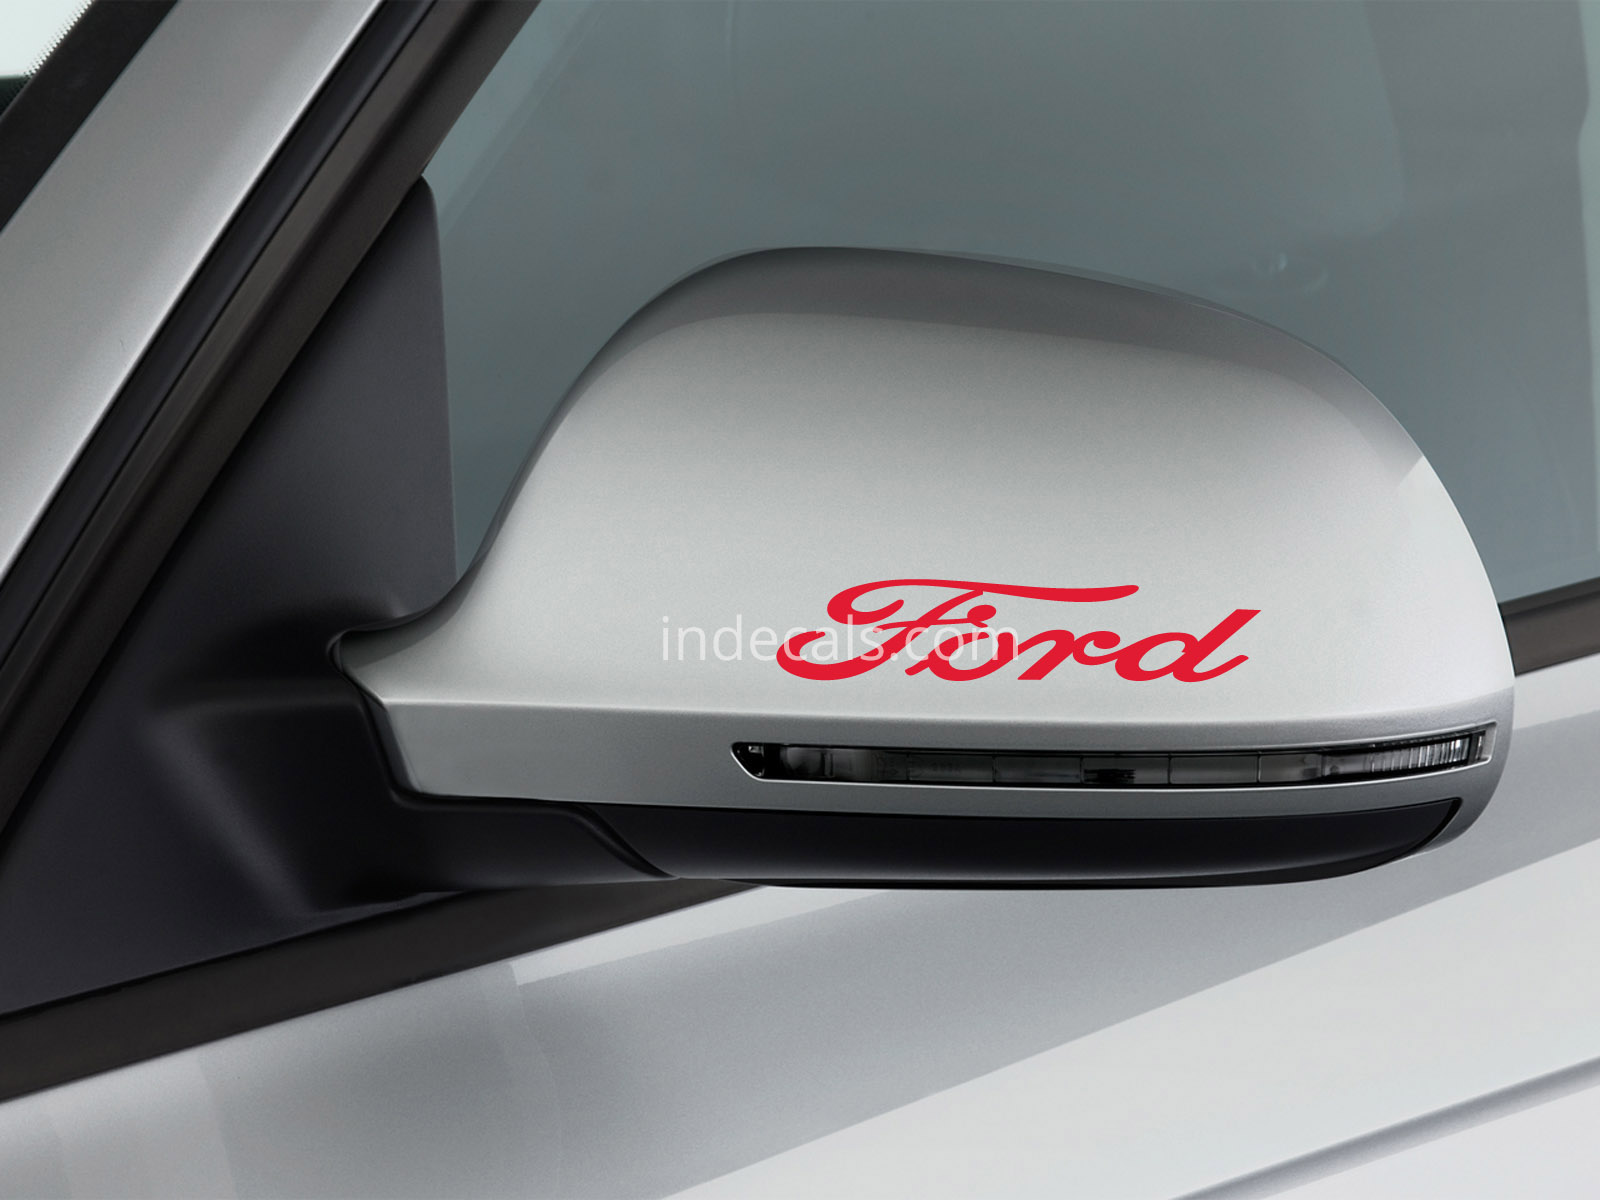 3 x Ford Stickers for Mirrors - White